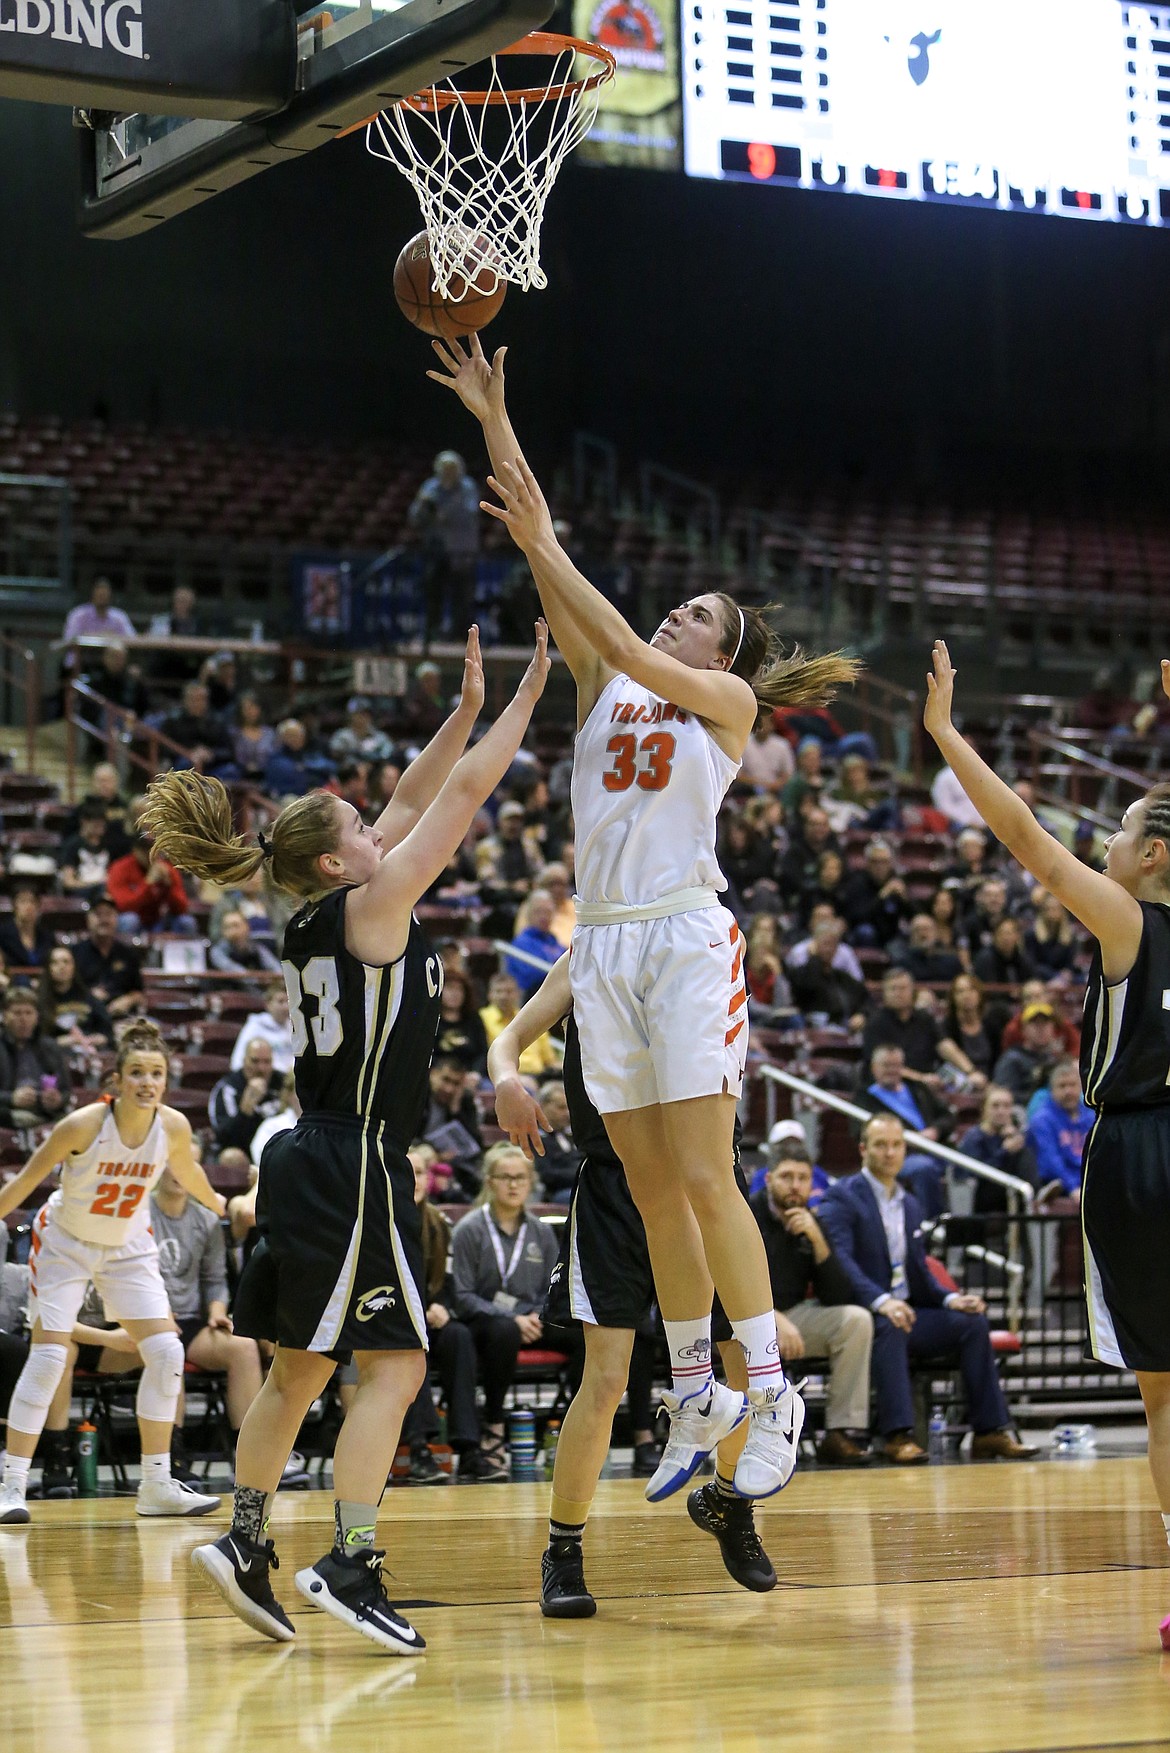 JASON DUCHOW PHOTOGRAPHY
Melody Kempton of Post Falls goes up for a layin in Thursday&#146;s state 5A girls game vs. Capital.